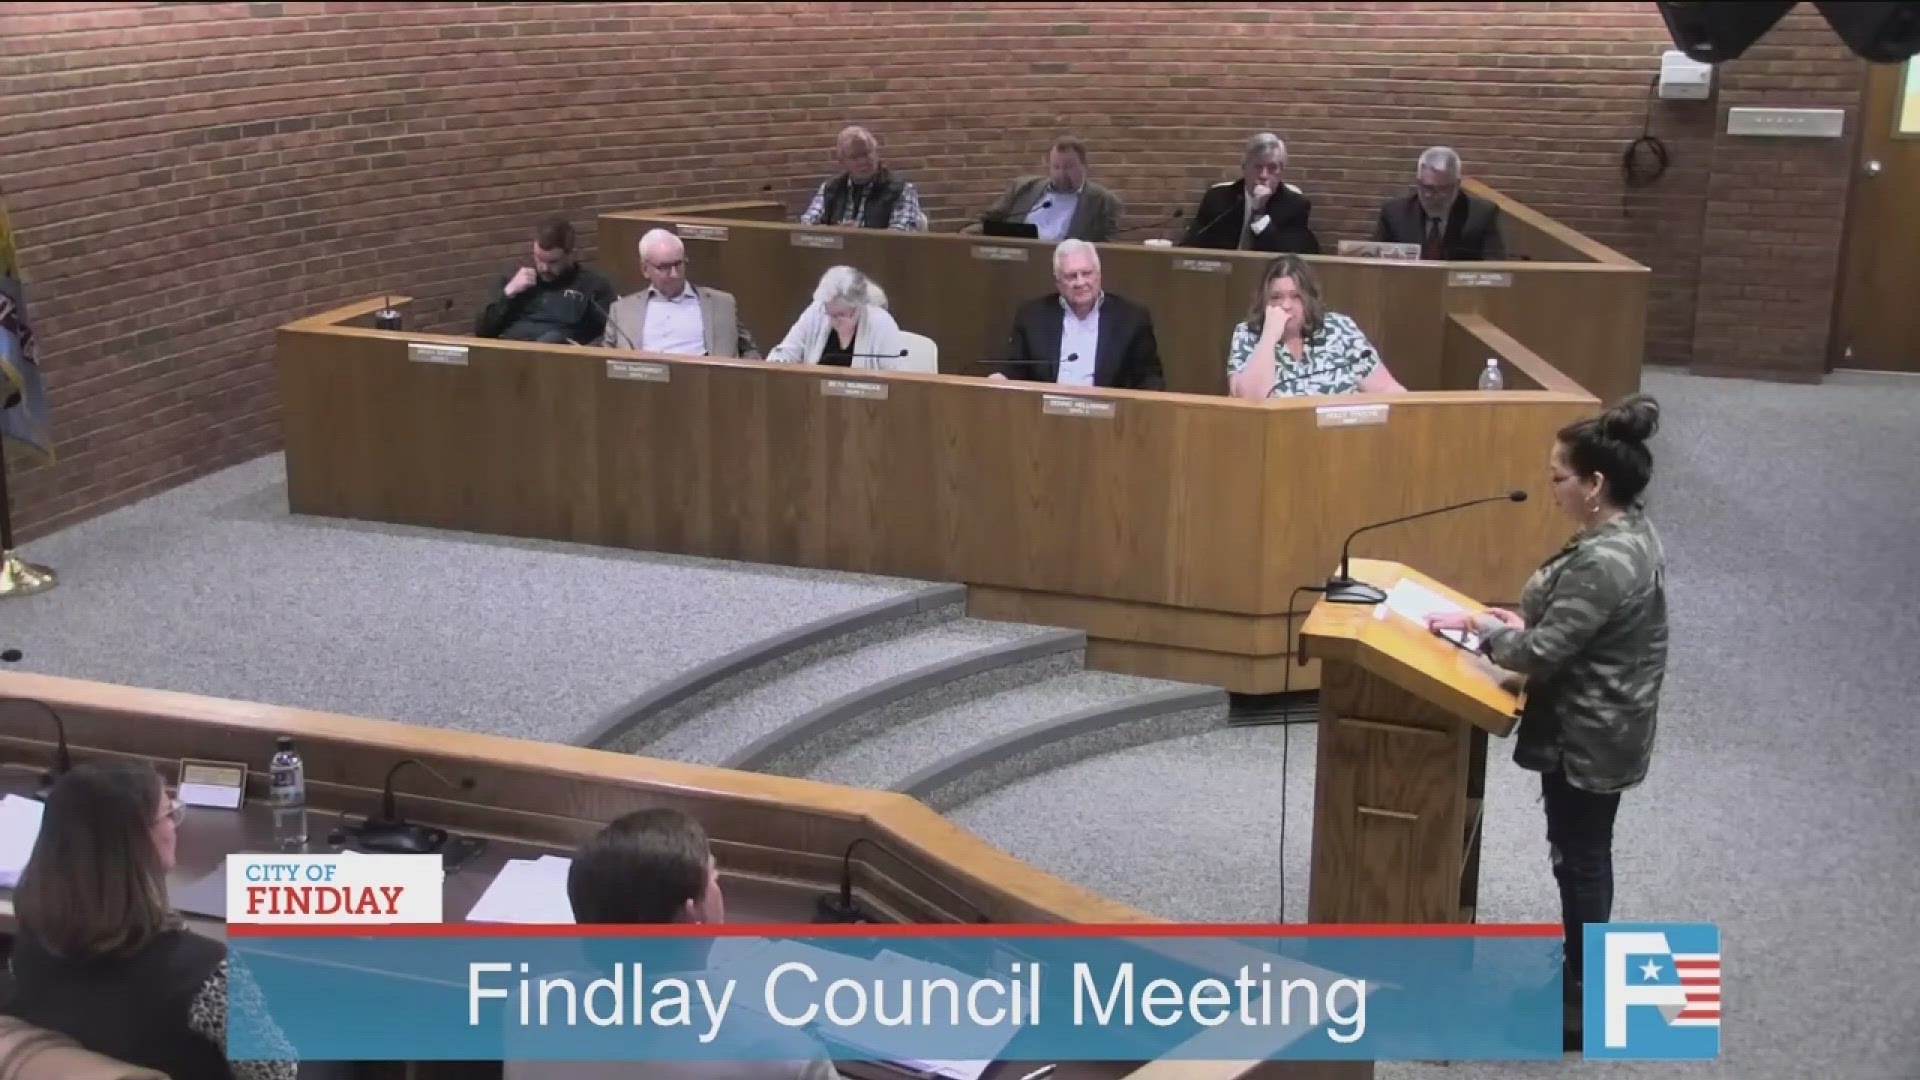 An intense meeting happened at a Findlay City Council meeting last month. Now some council members don't want it to happen again.